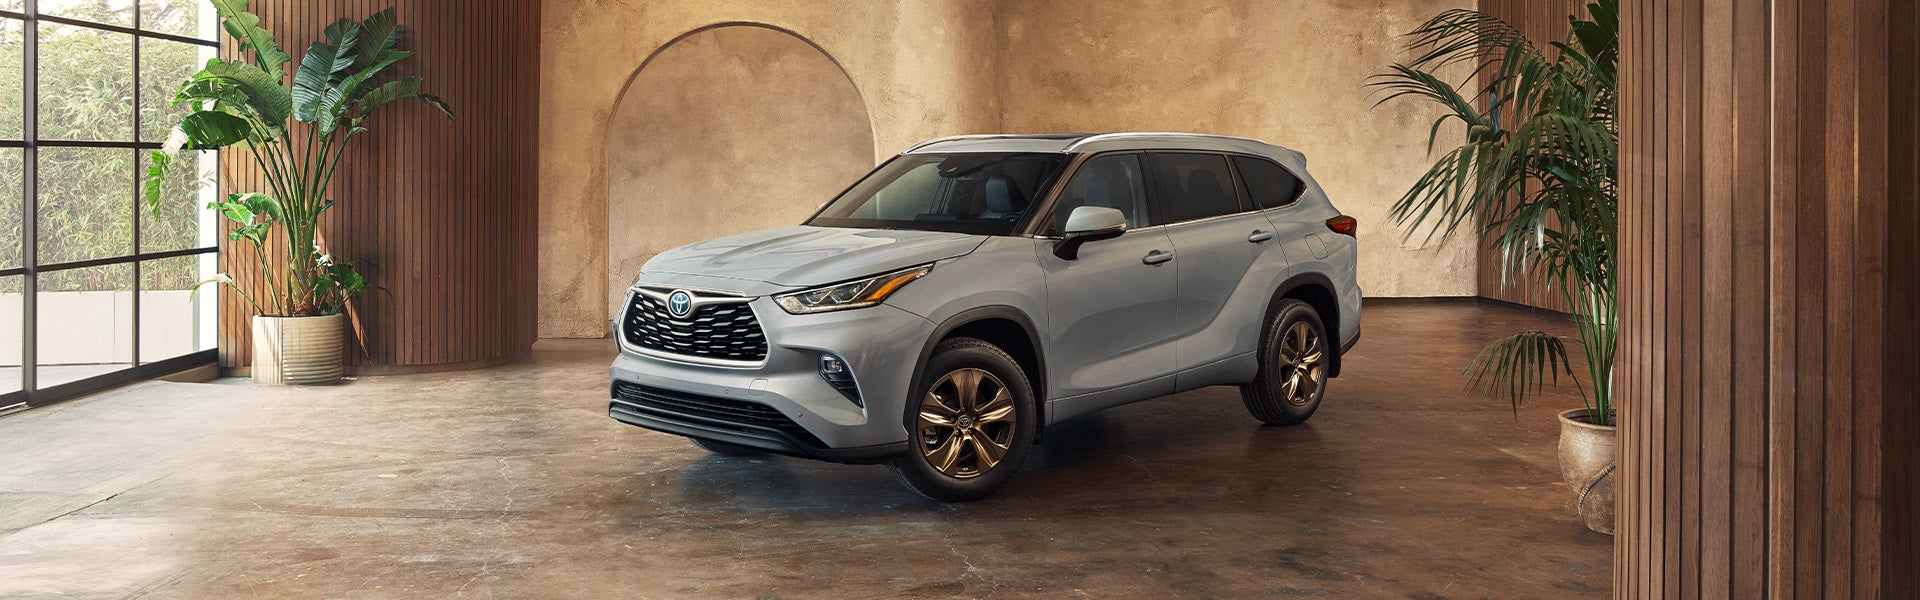 Model Features of the 2022 Toyota Highlander Hybrid at Bennett Toyota | Cool Gray Highlander Hybrid Bronze Edition Parked in Luxury Studio